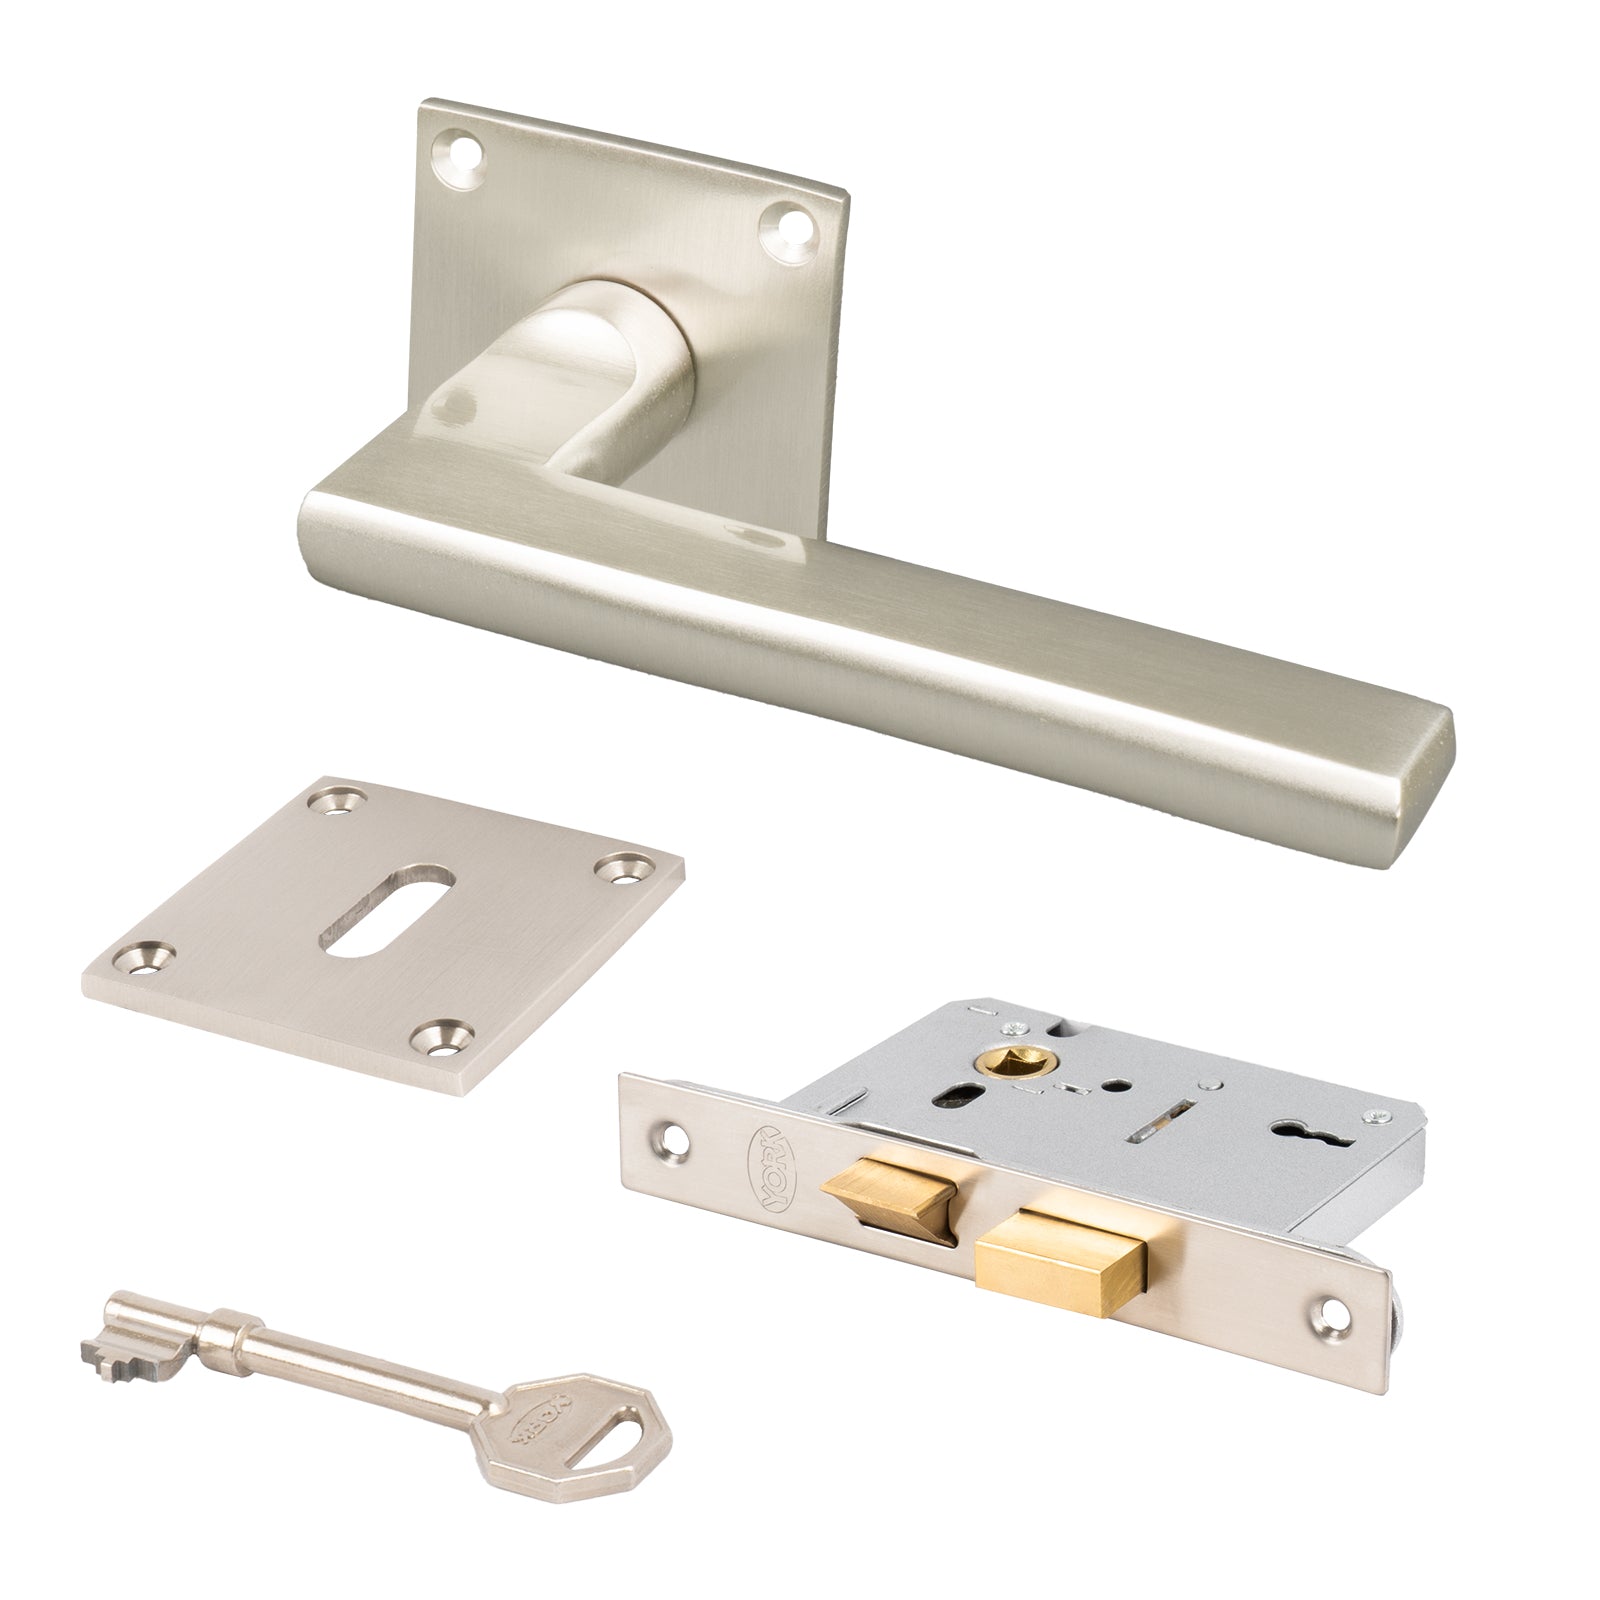 SHOW Trident Square Rose Door Handles 3 Lever Latch set with Satin Nickel finish